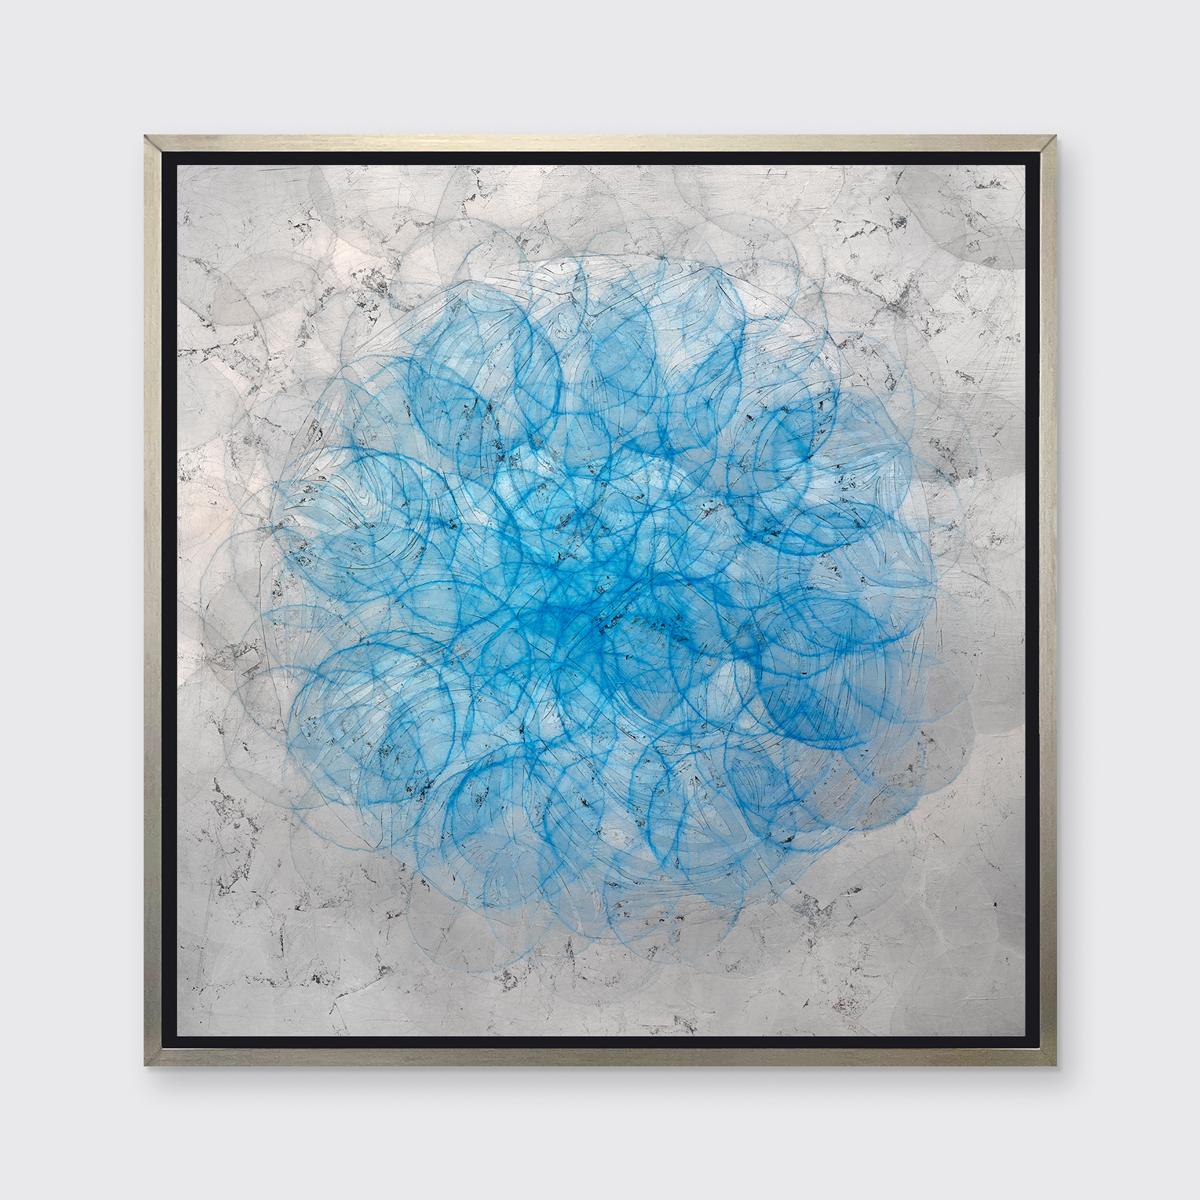 This abstract contemporary limited edition print by Roger Mudre features thin blue circular shapes which overlap one another to create a light, almost illusory larger circle at the center of the composition. Outside of this geometric circular shape,